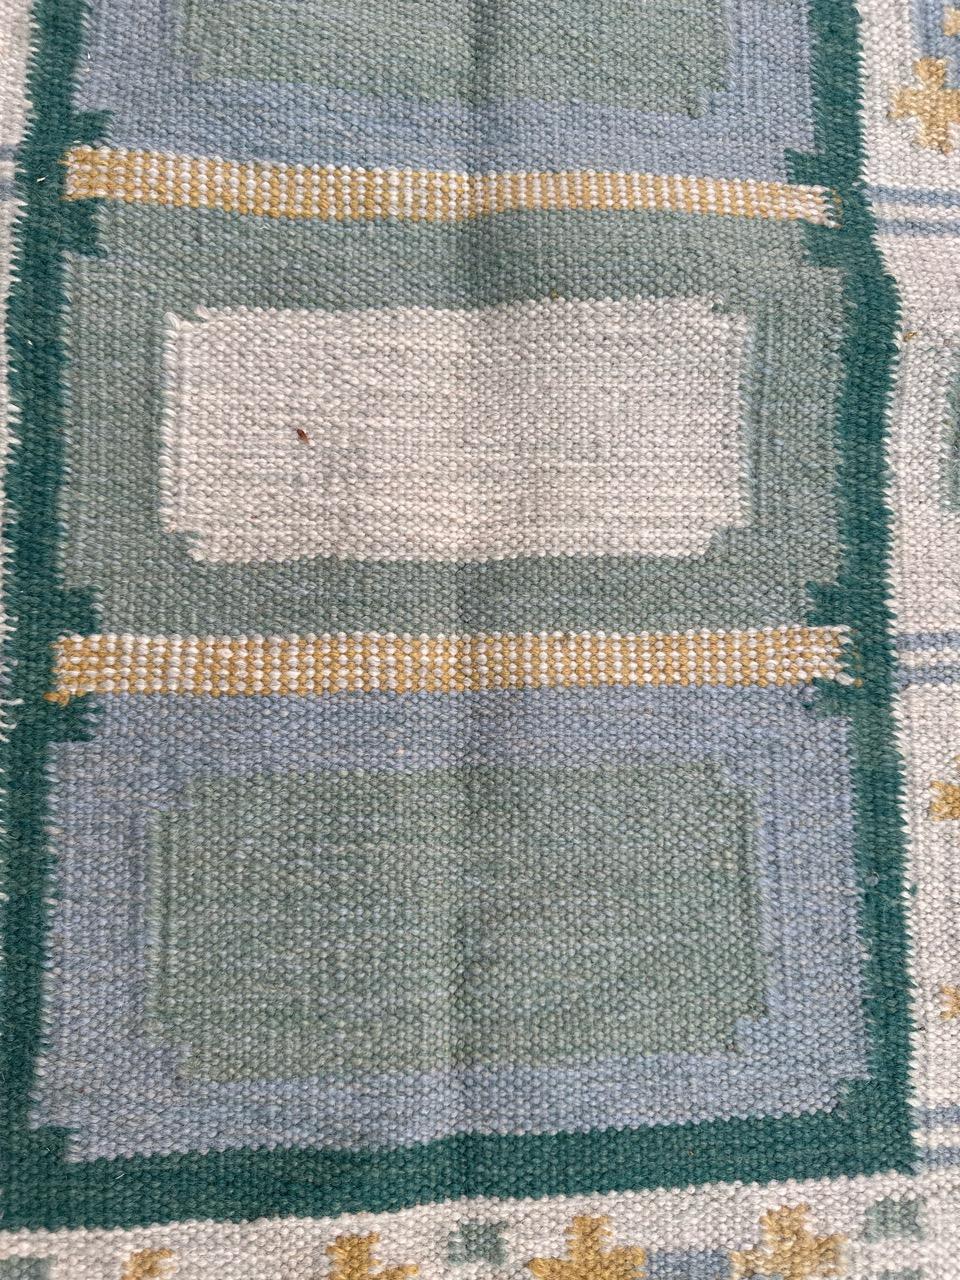 Bobyrug’s Pretty Little Scandinavian Flat Woven Rug In Excellent Condition For Sale In Saint Ouen, FR